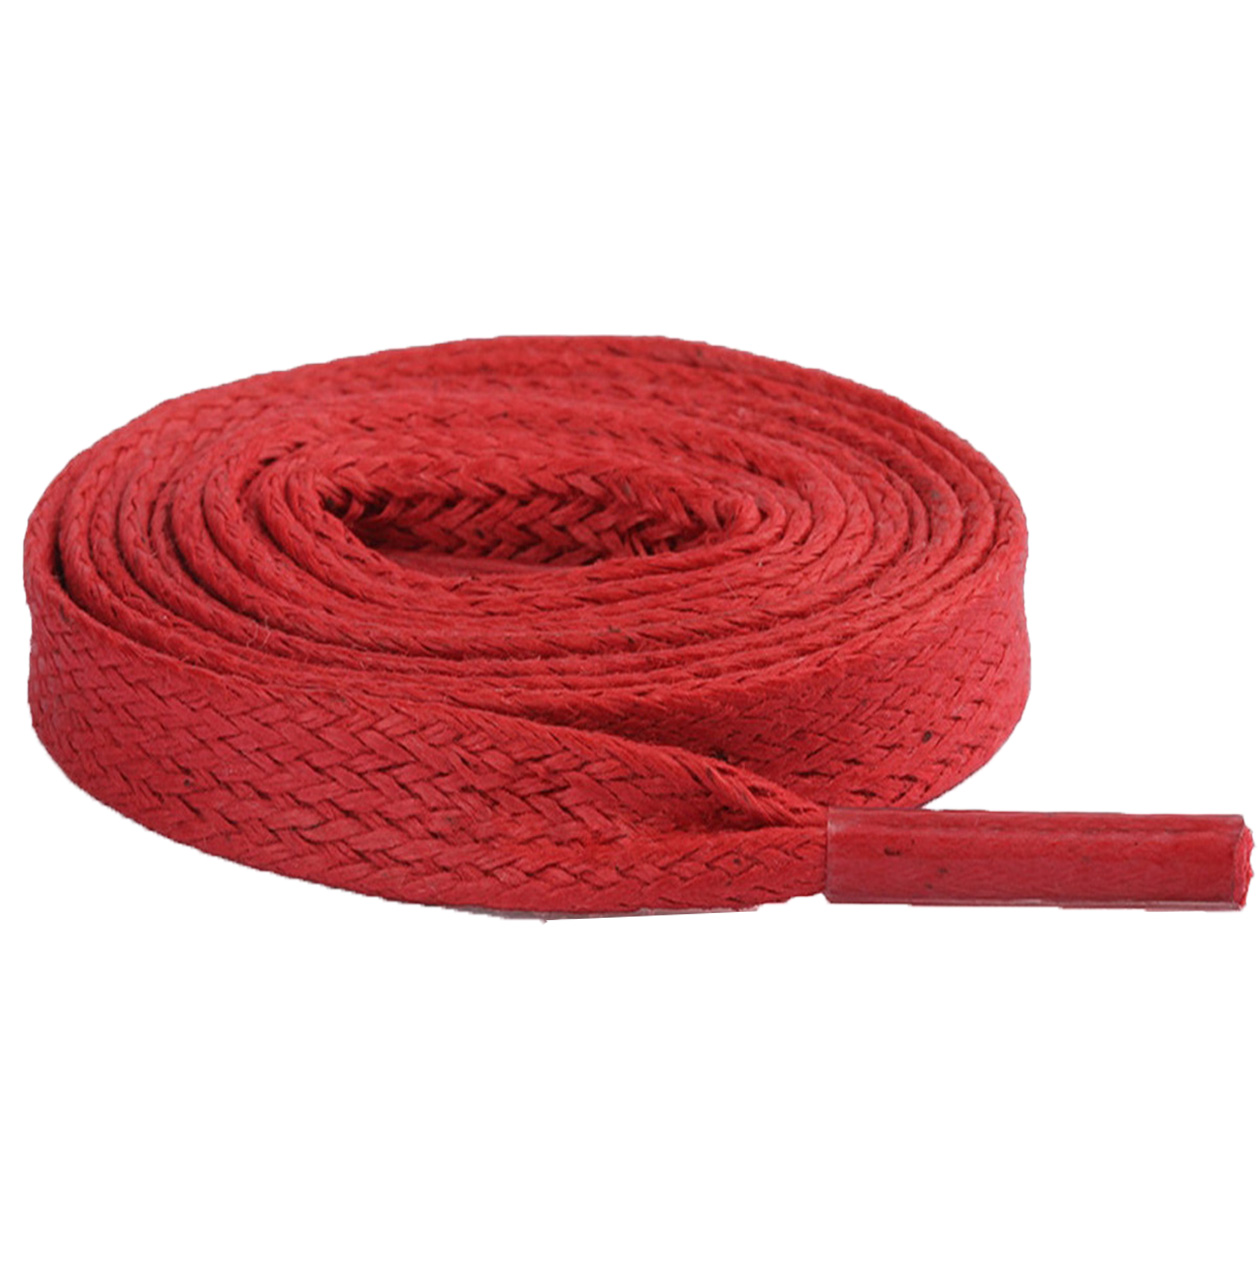 Red-Flat-Waxed-Shoelaces-new.jpg